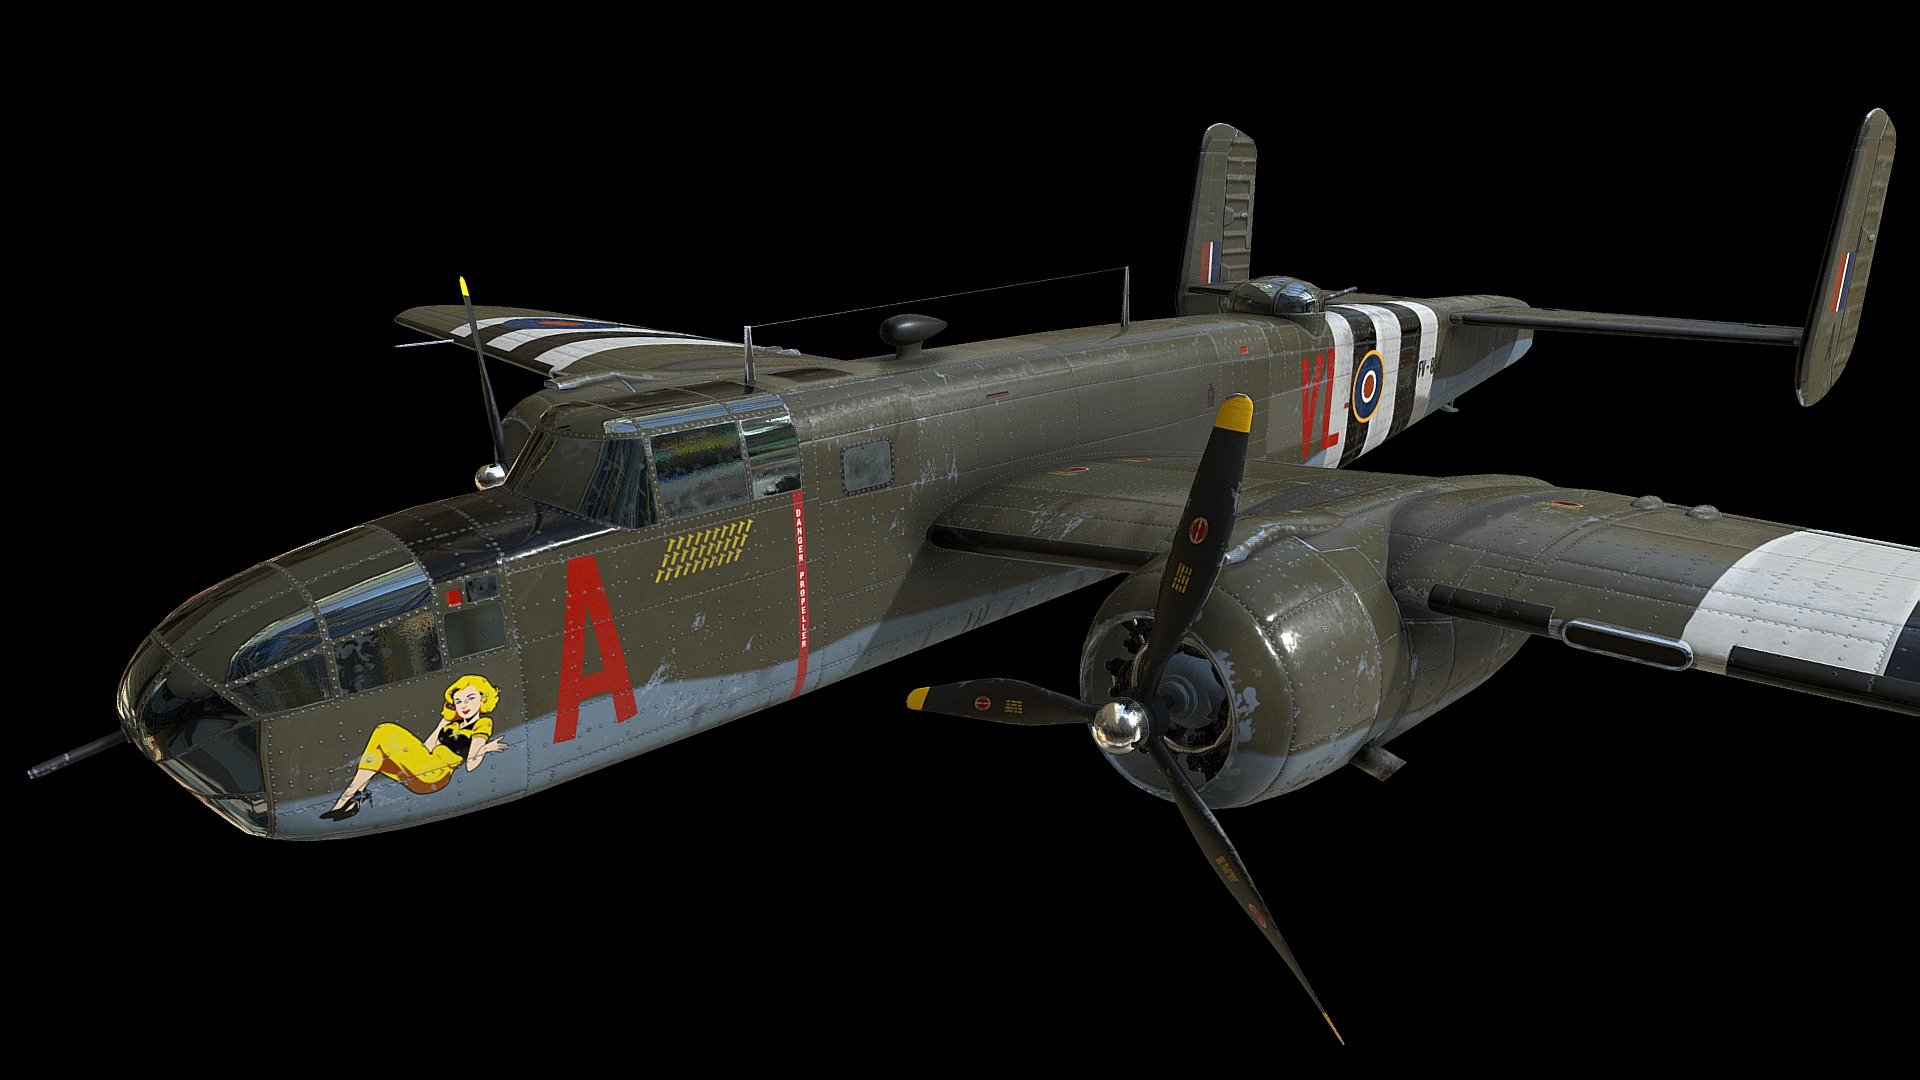 This is a model of a B-25 Mitchell bomber used by the Royal Air Force, as used in World War Two, featuring invasion stripes (first used to identify allied aircraft on D-Day).

The mesh was made in Blender while the textures were made in Substance Painter. The texture includes a fictional nose art figure, various labels and accurate panel/rivet lines.

Includes the following texture maps:

Base Colour (8K)
Metalness (8K)
Normals (4K)
Roughness (4K) - North American B-25 Mitchell - Buy Royalty Free 3D model by 3D-by-LS 3d model